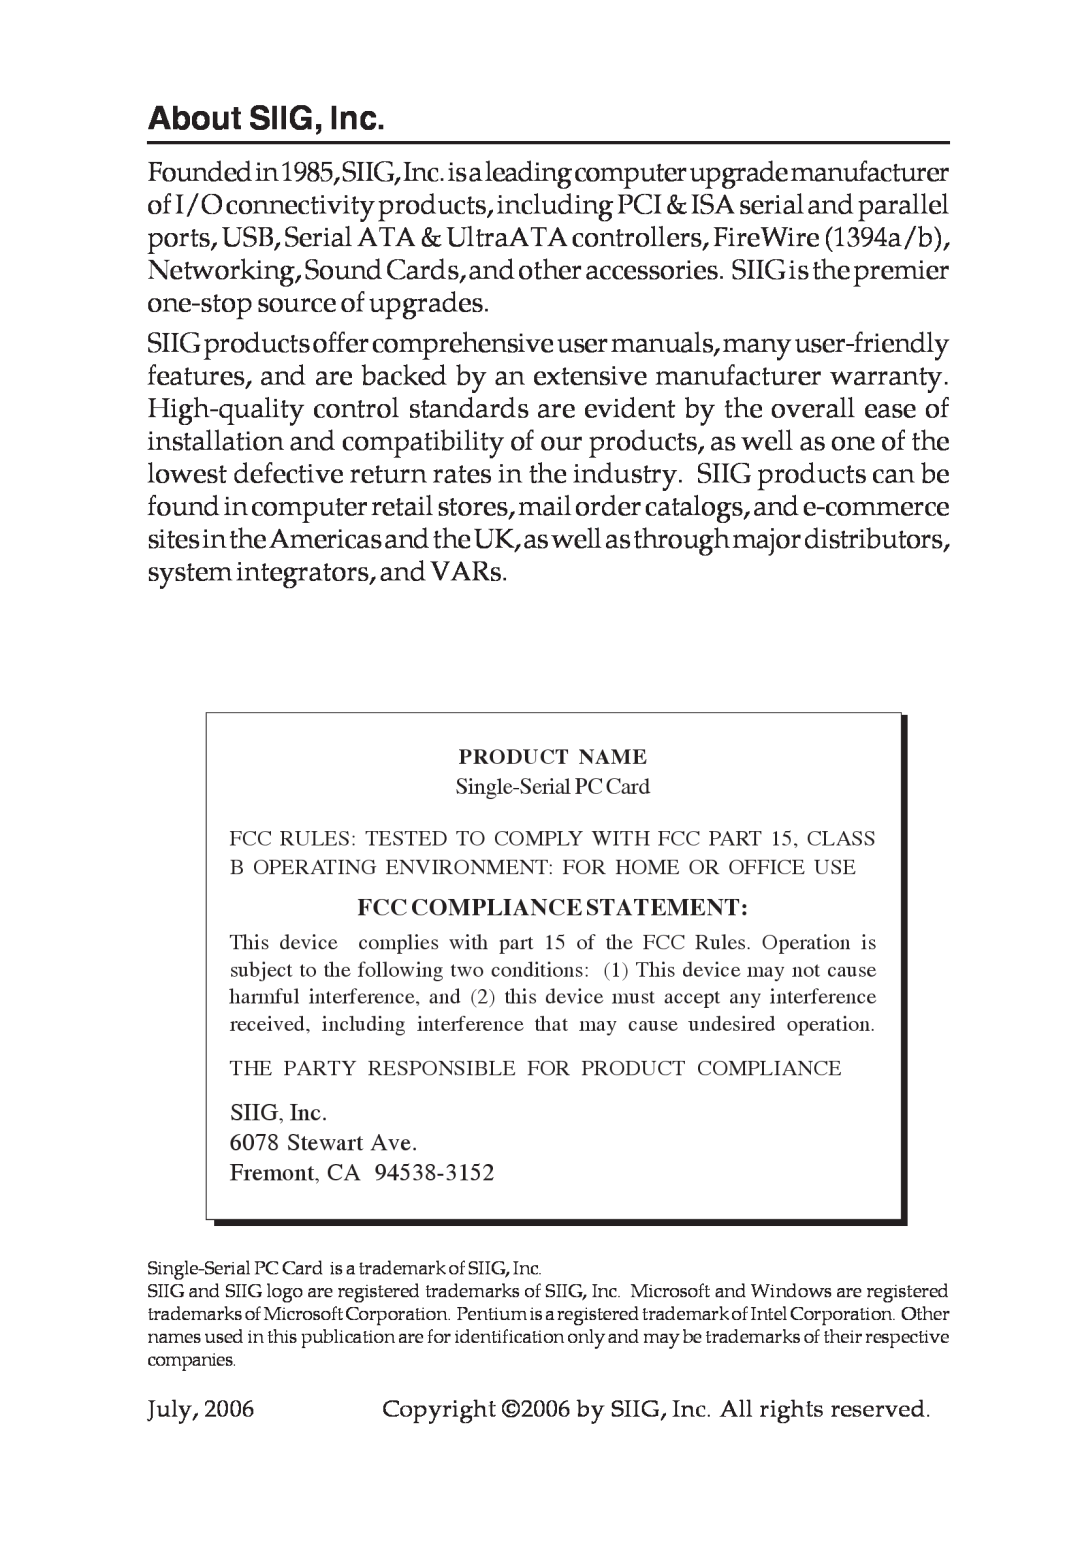 SIIG 4590, 4110 manual About SIIG, Inc, Fcc Compliance Statement 